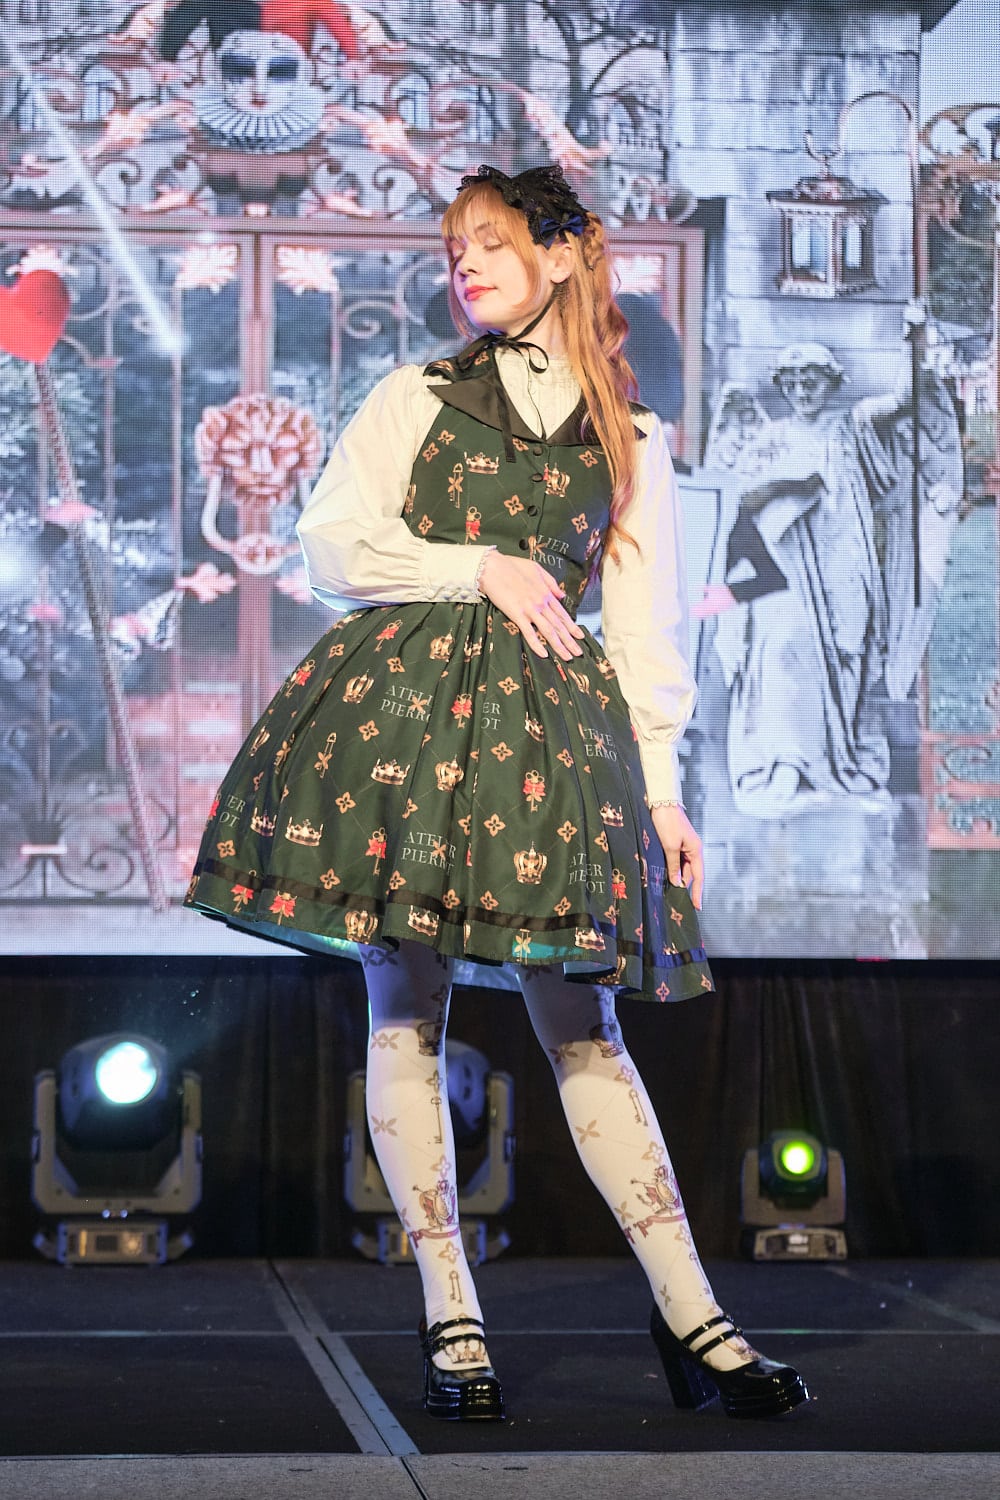 Classic lolita wearing green vest JSK with crown and key allover print, white blouse, and white matching print tights - fullbody.